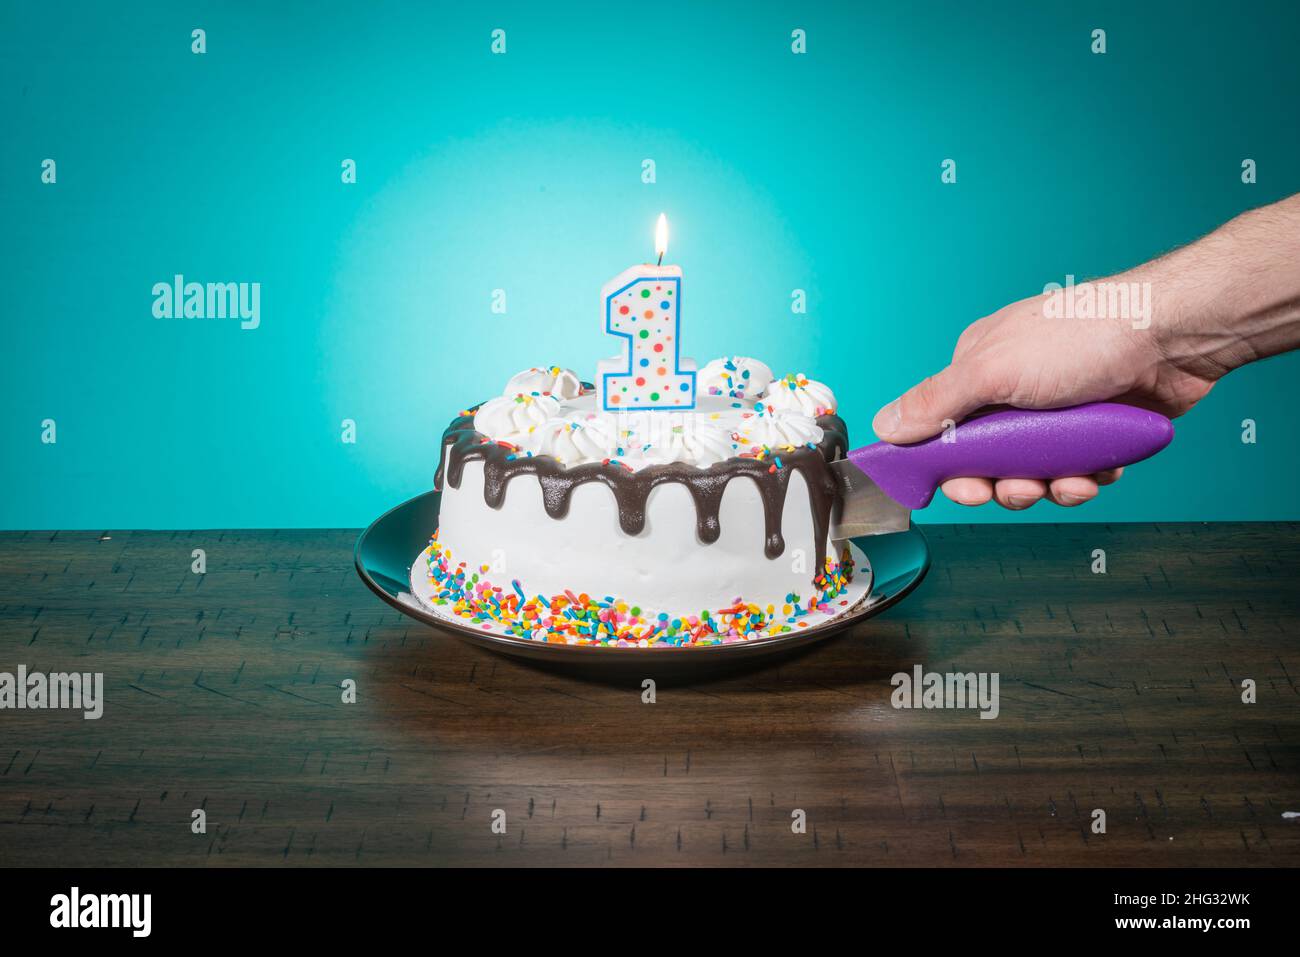 A birthday cake bears a candle in the shape of the number 1 while a hand cuts a slice. Stock Photo